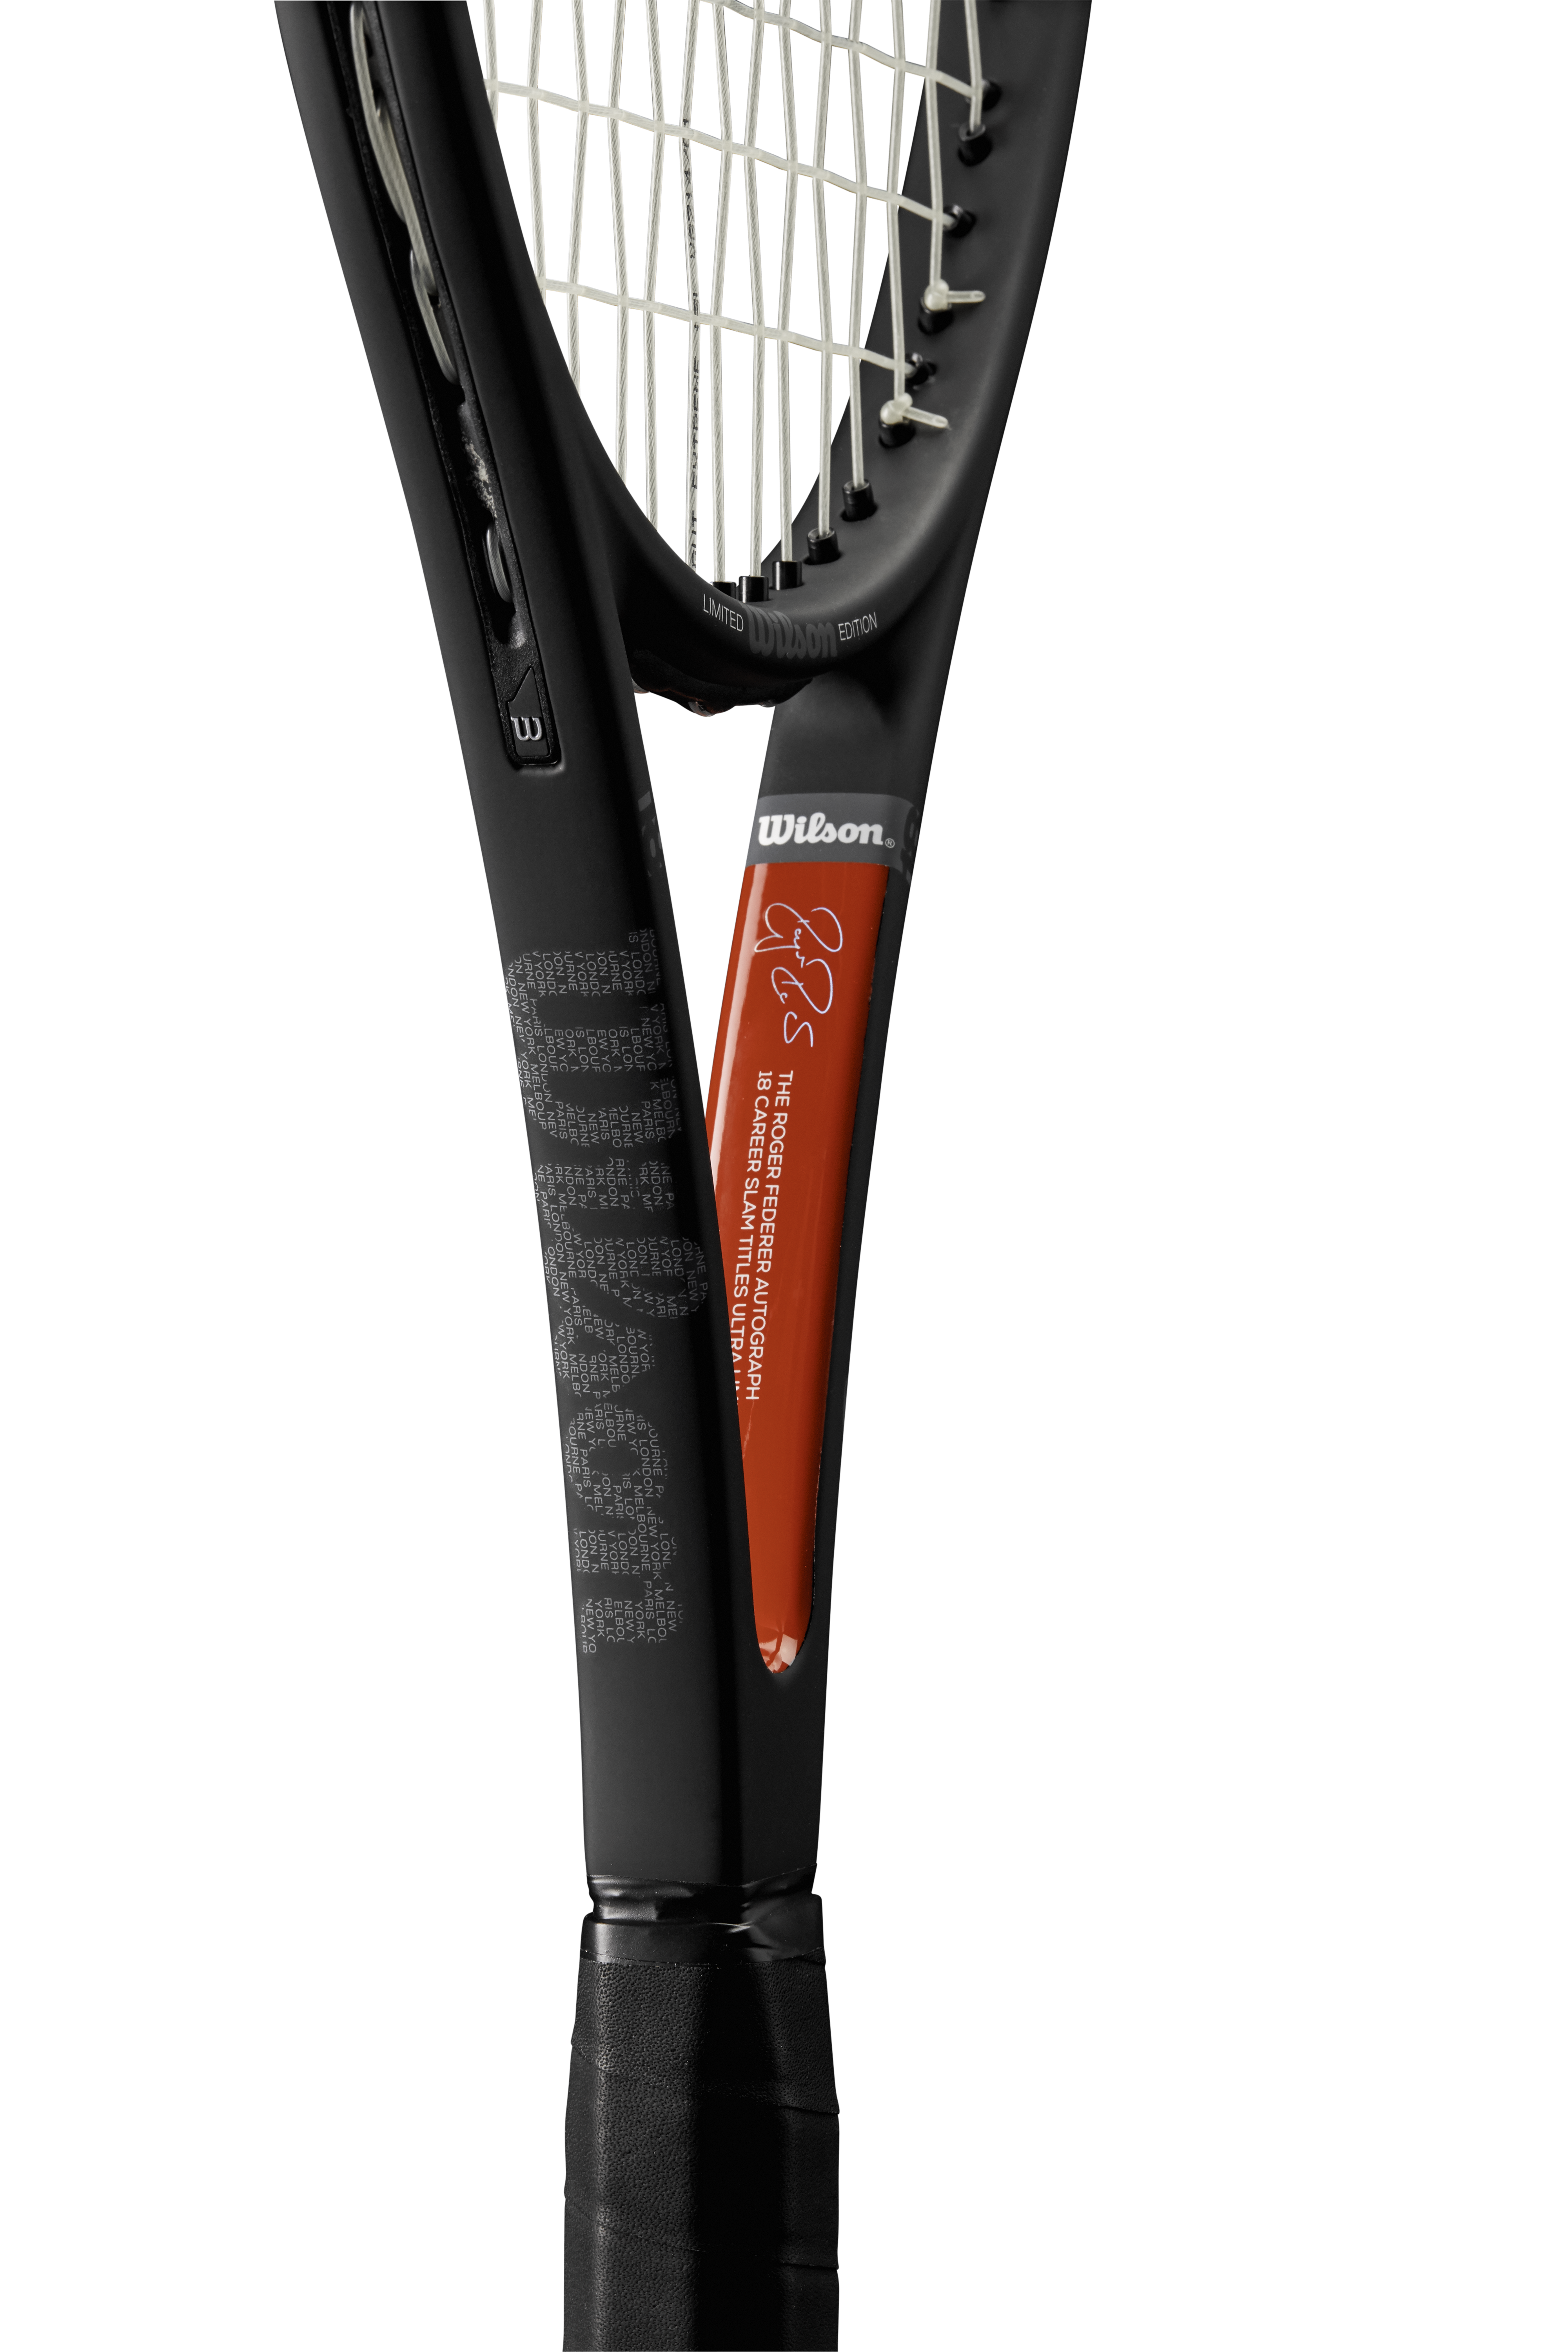 Wilson Releases 18 Limited Edition Pro Staff RF97 Autograph Rackets